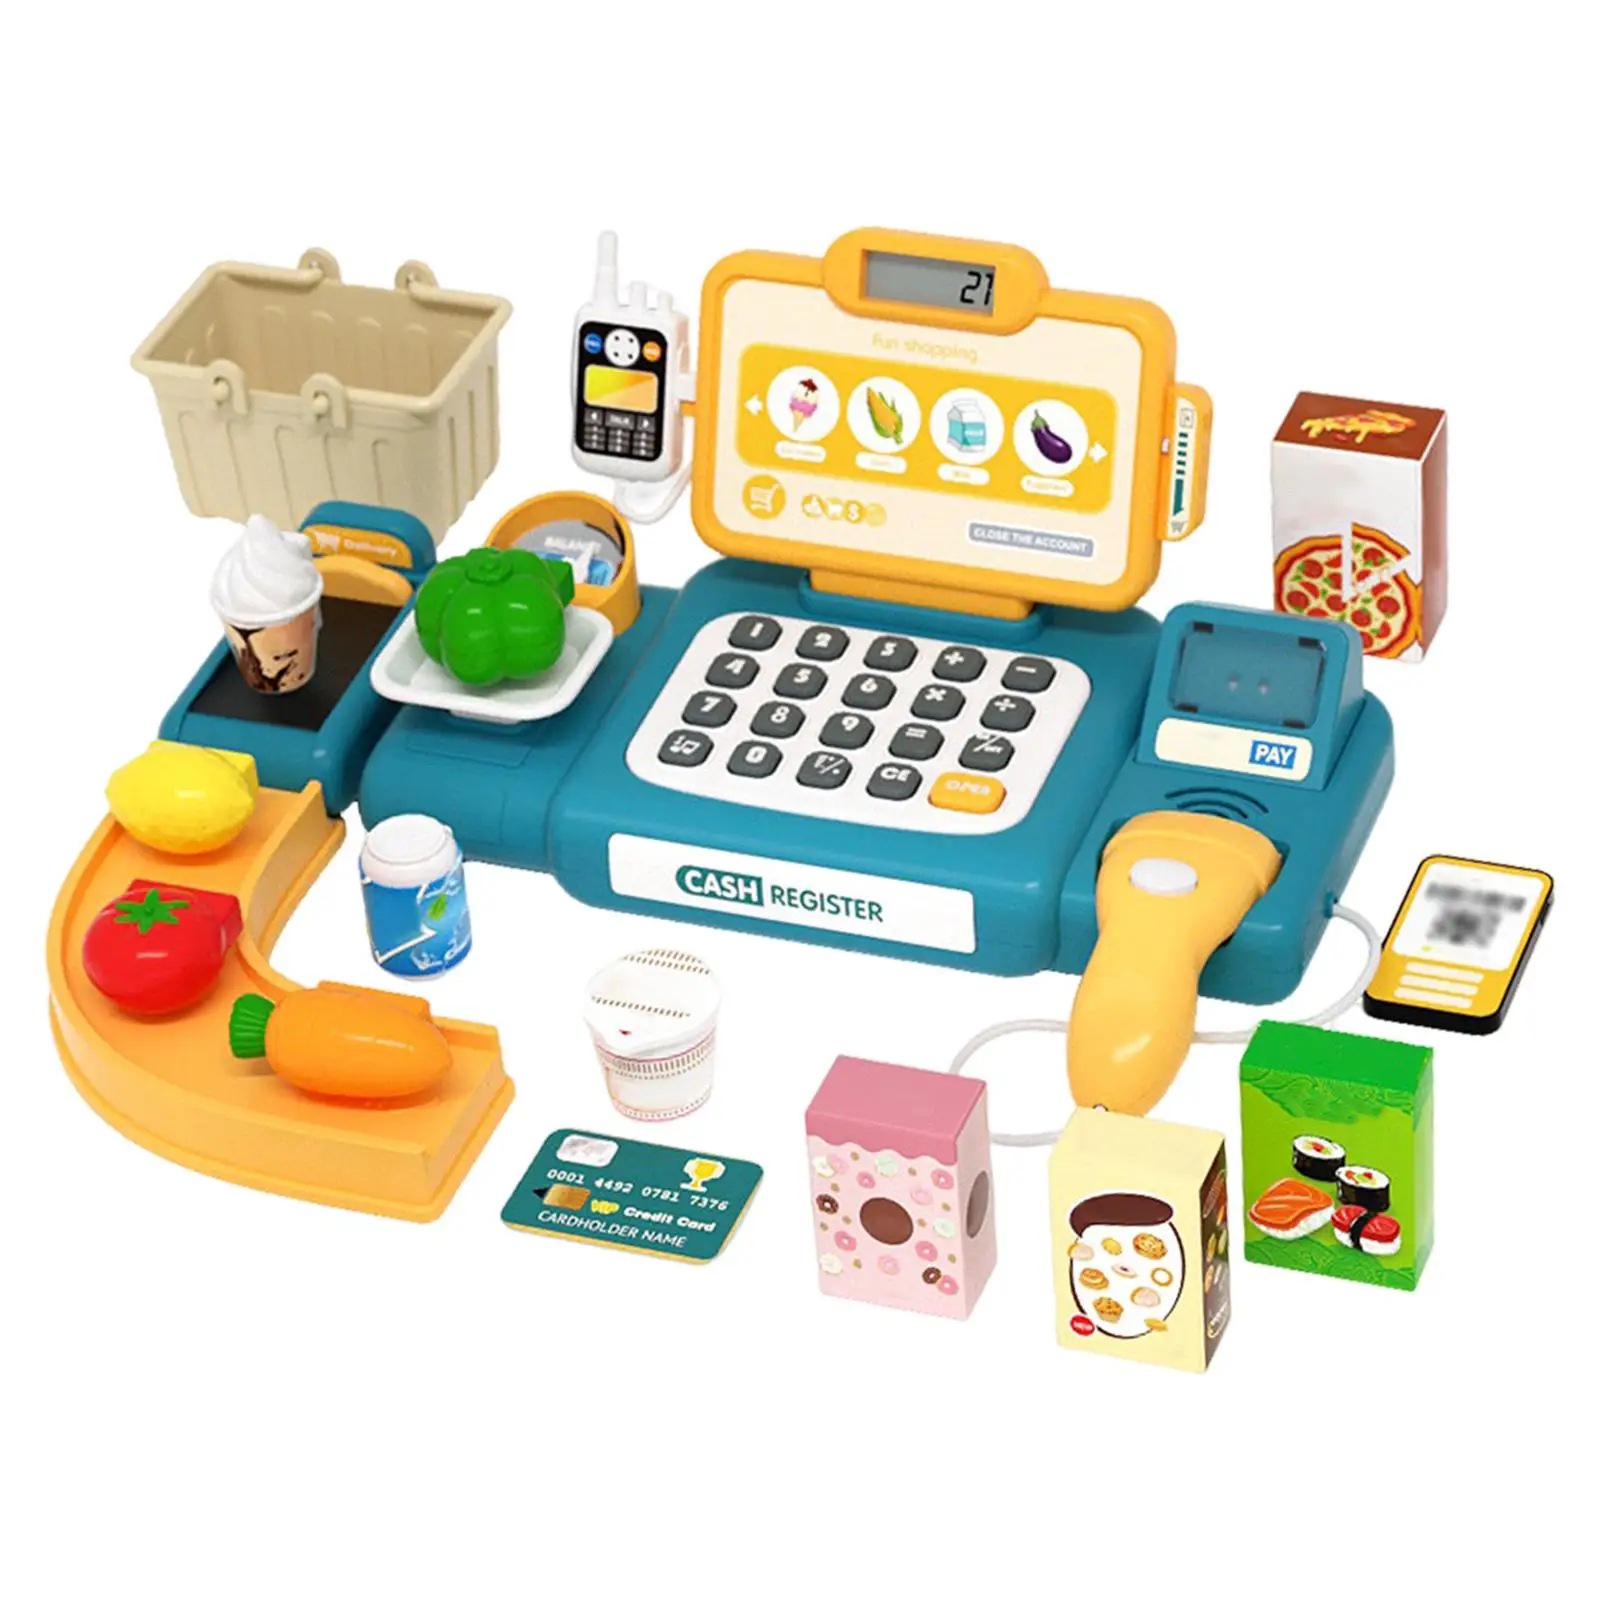 Pretend Play Store Educational Grocery Supermarket Playset Supermarket Cashier Toy for Interaction Play Activity Role Play